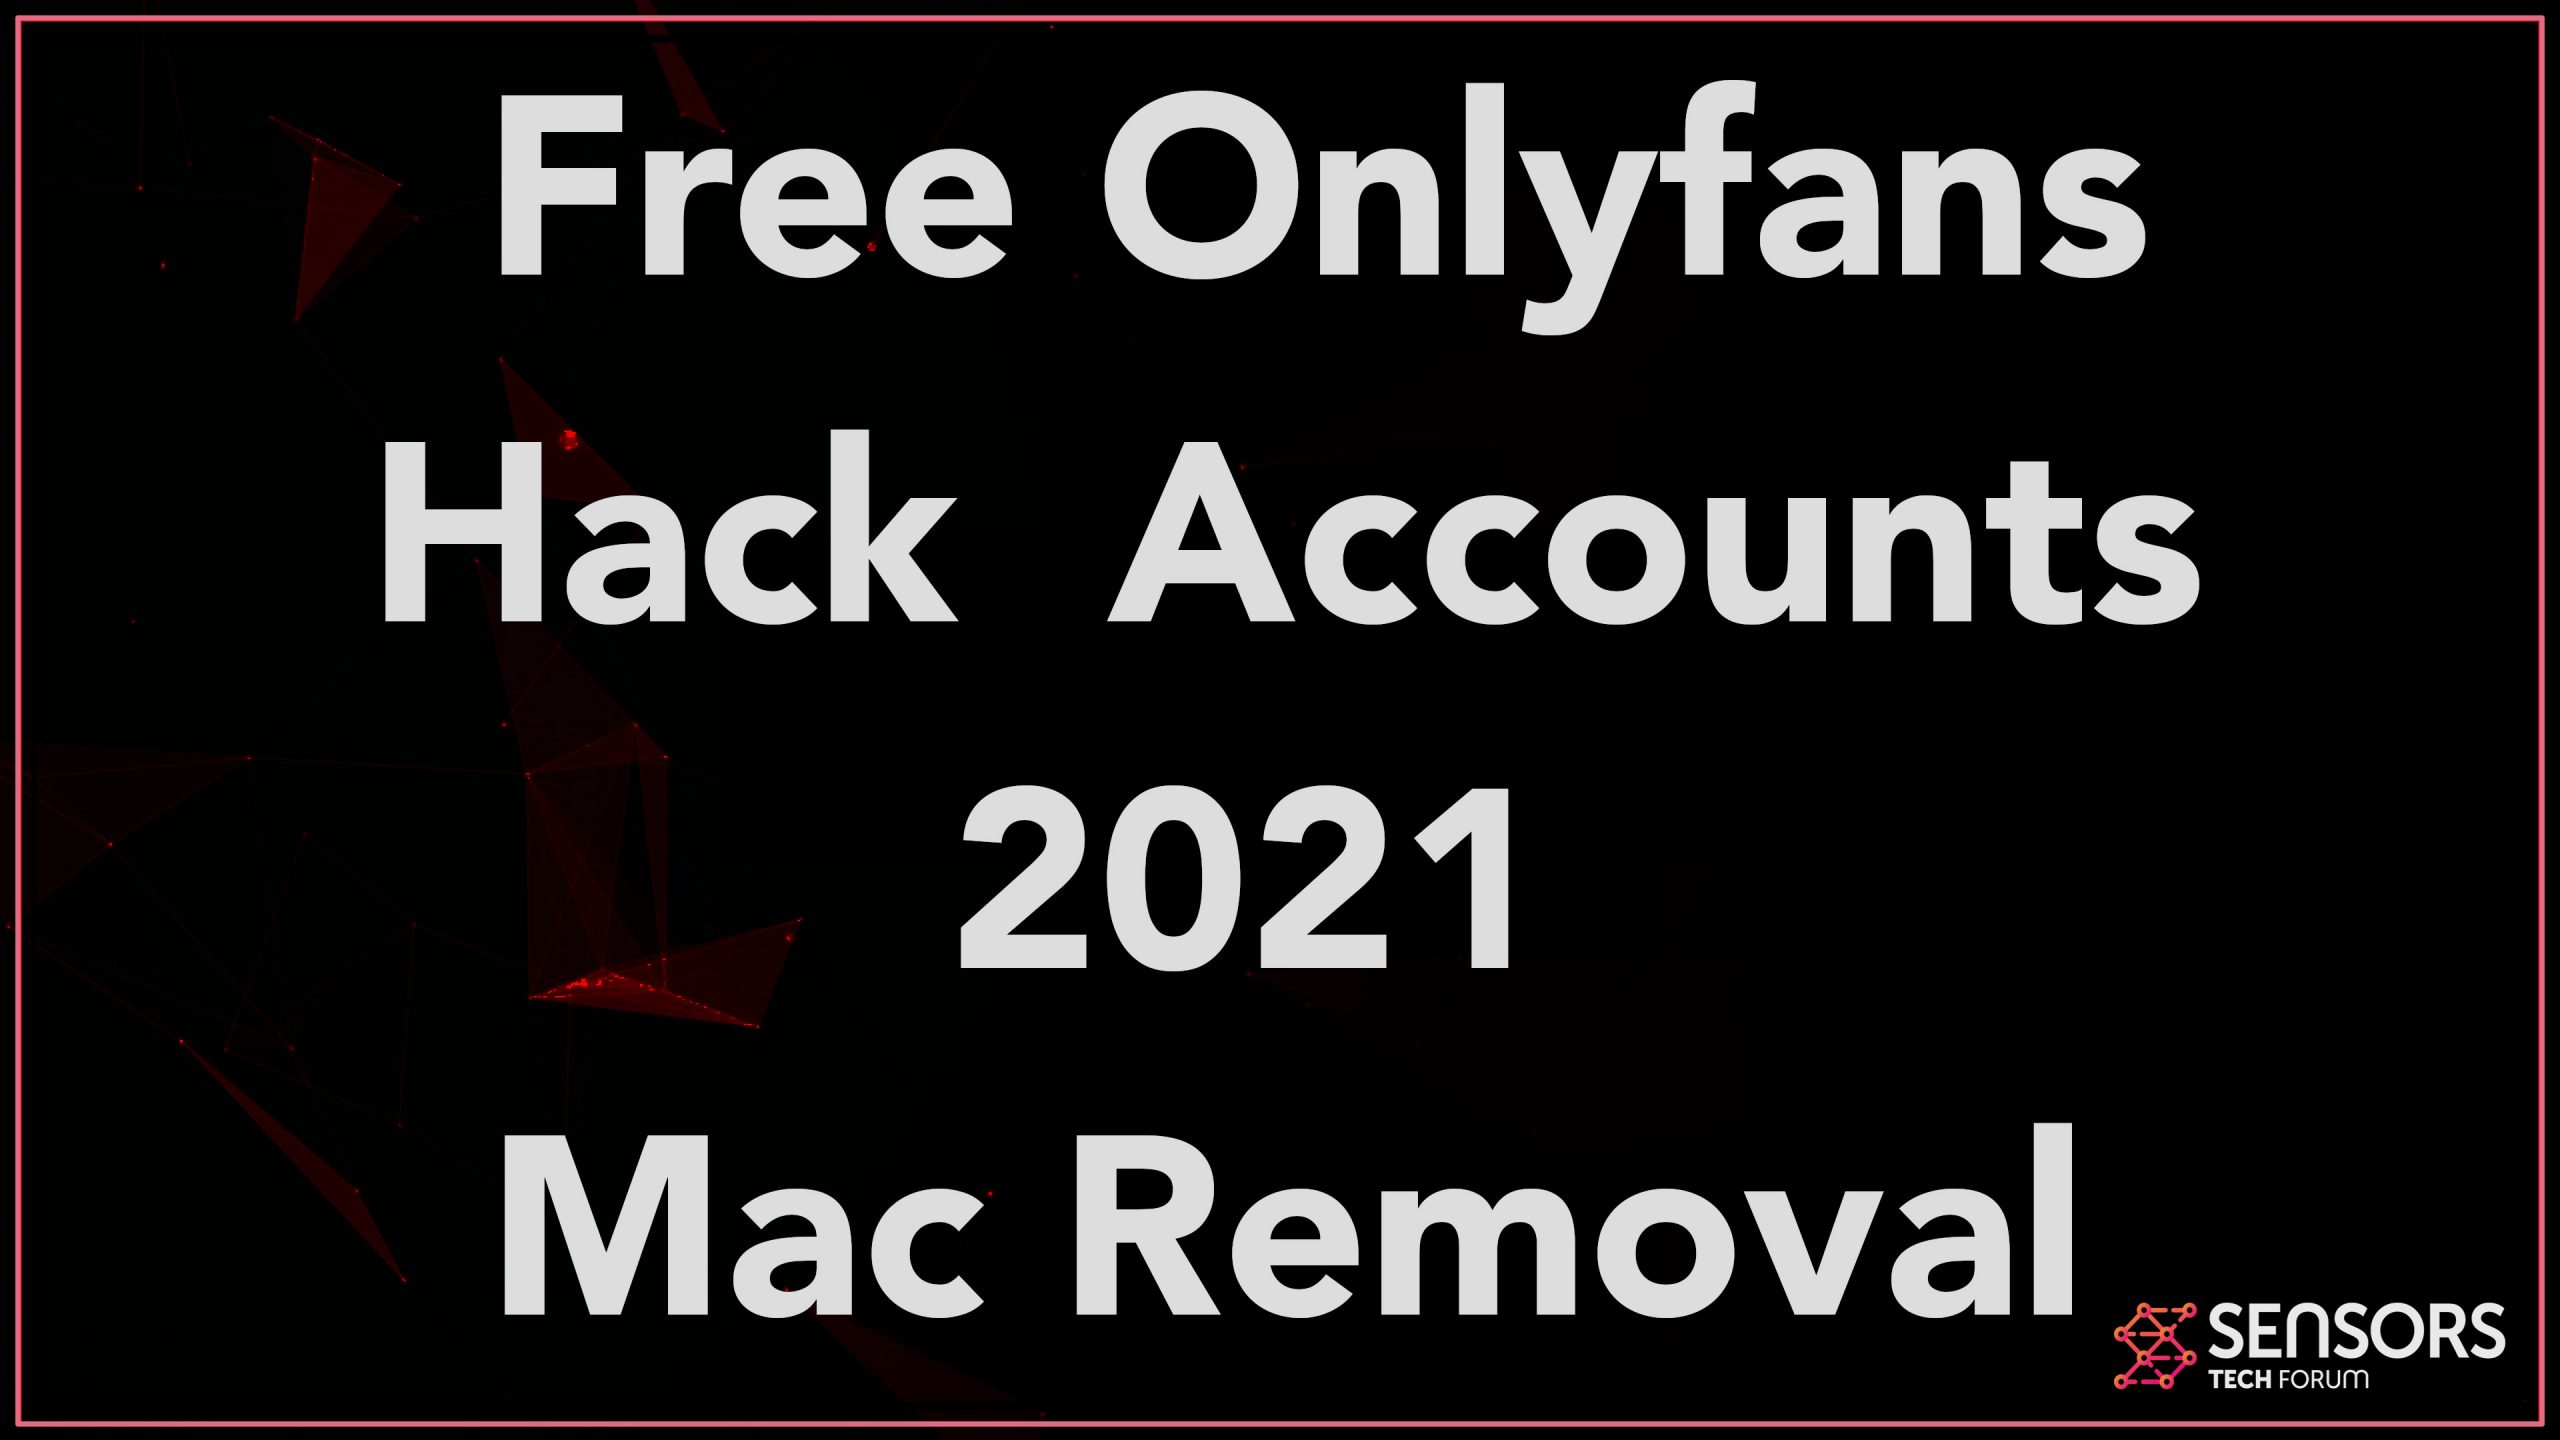 Only fans account hack